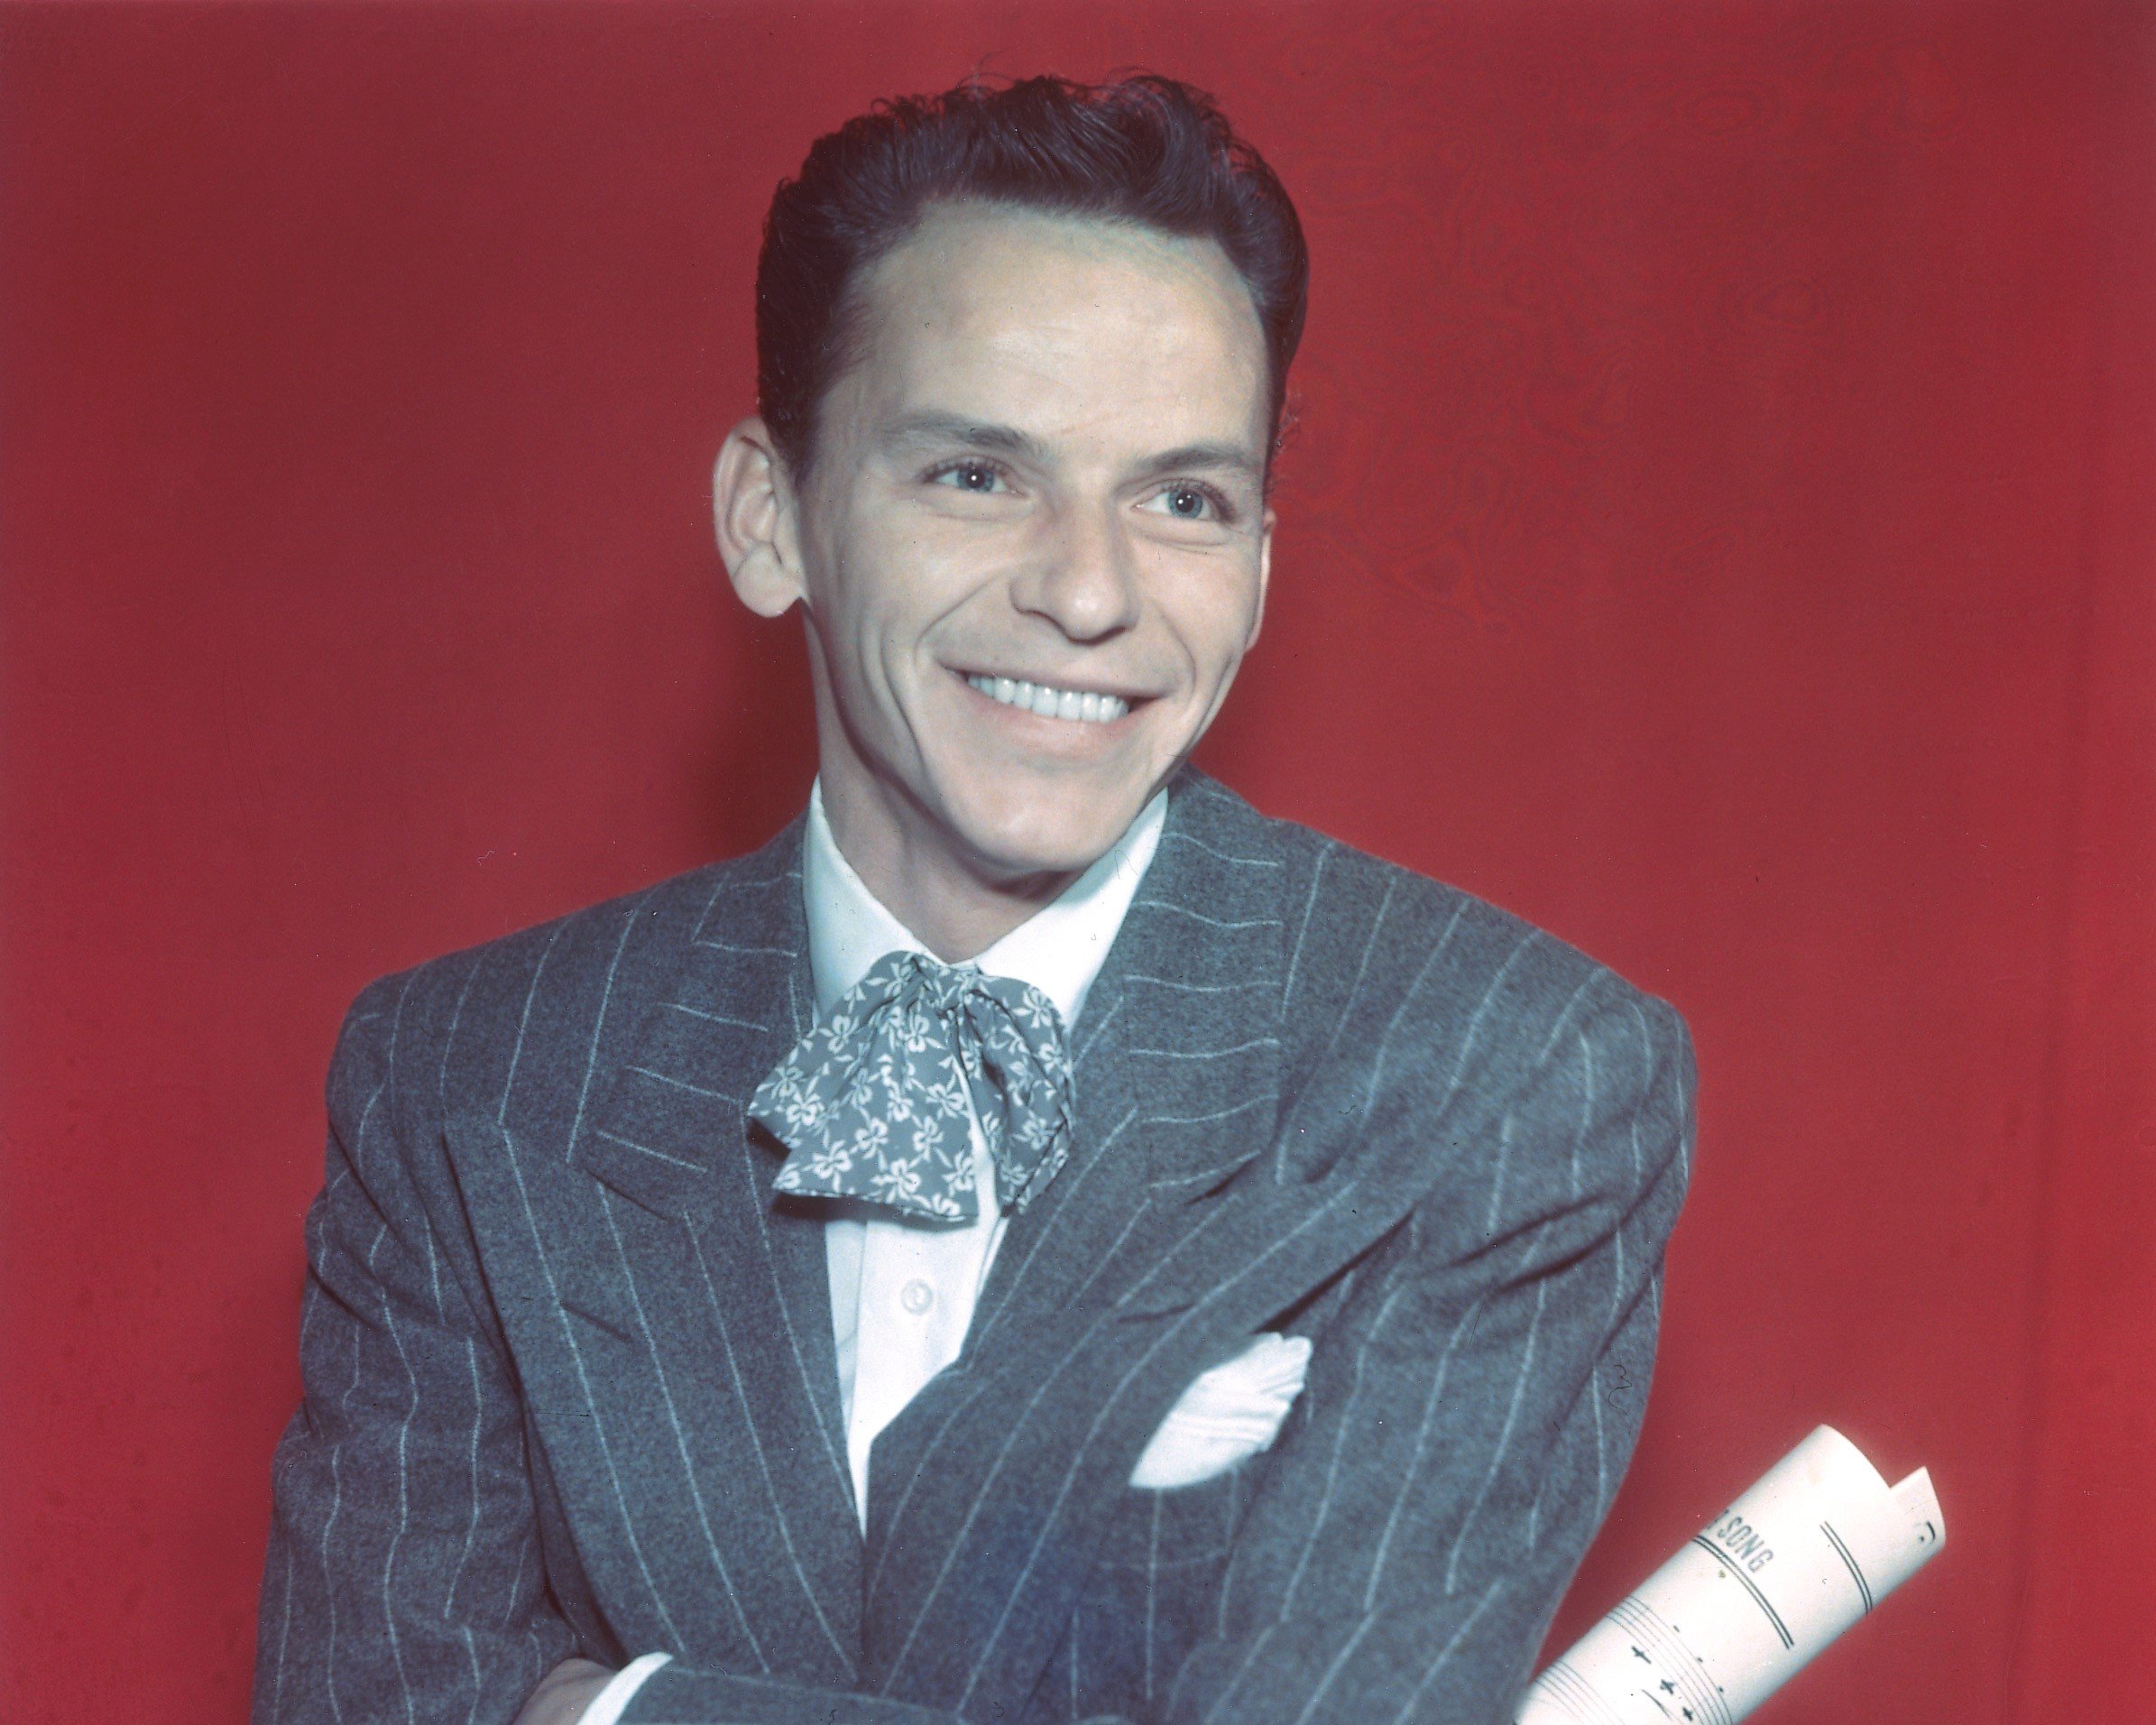 Frank Sinatra wears a suit and sits in front of a red background. 